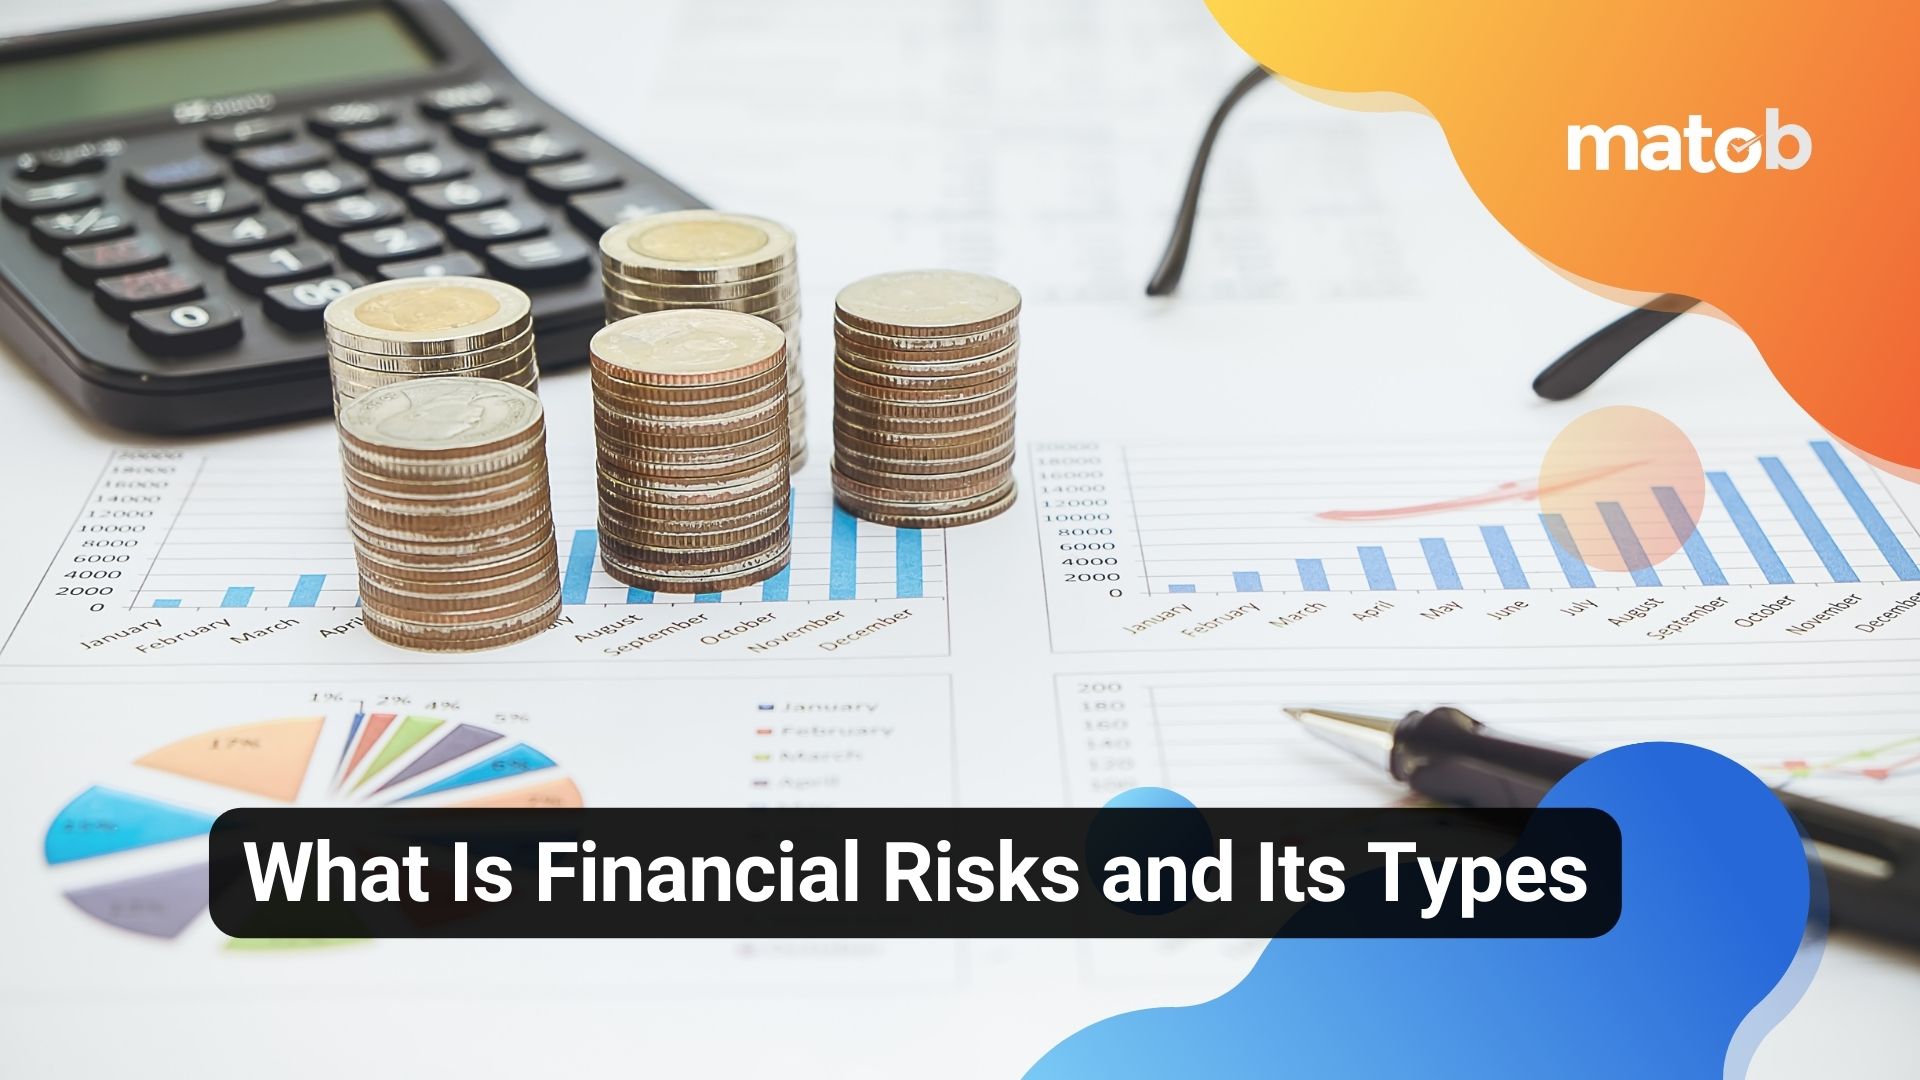 What Is Financial Risks and Its Types